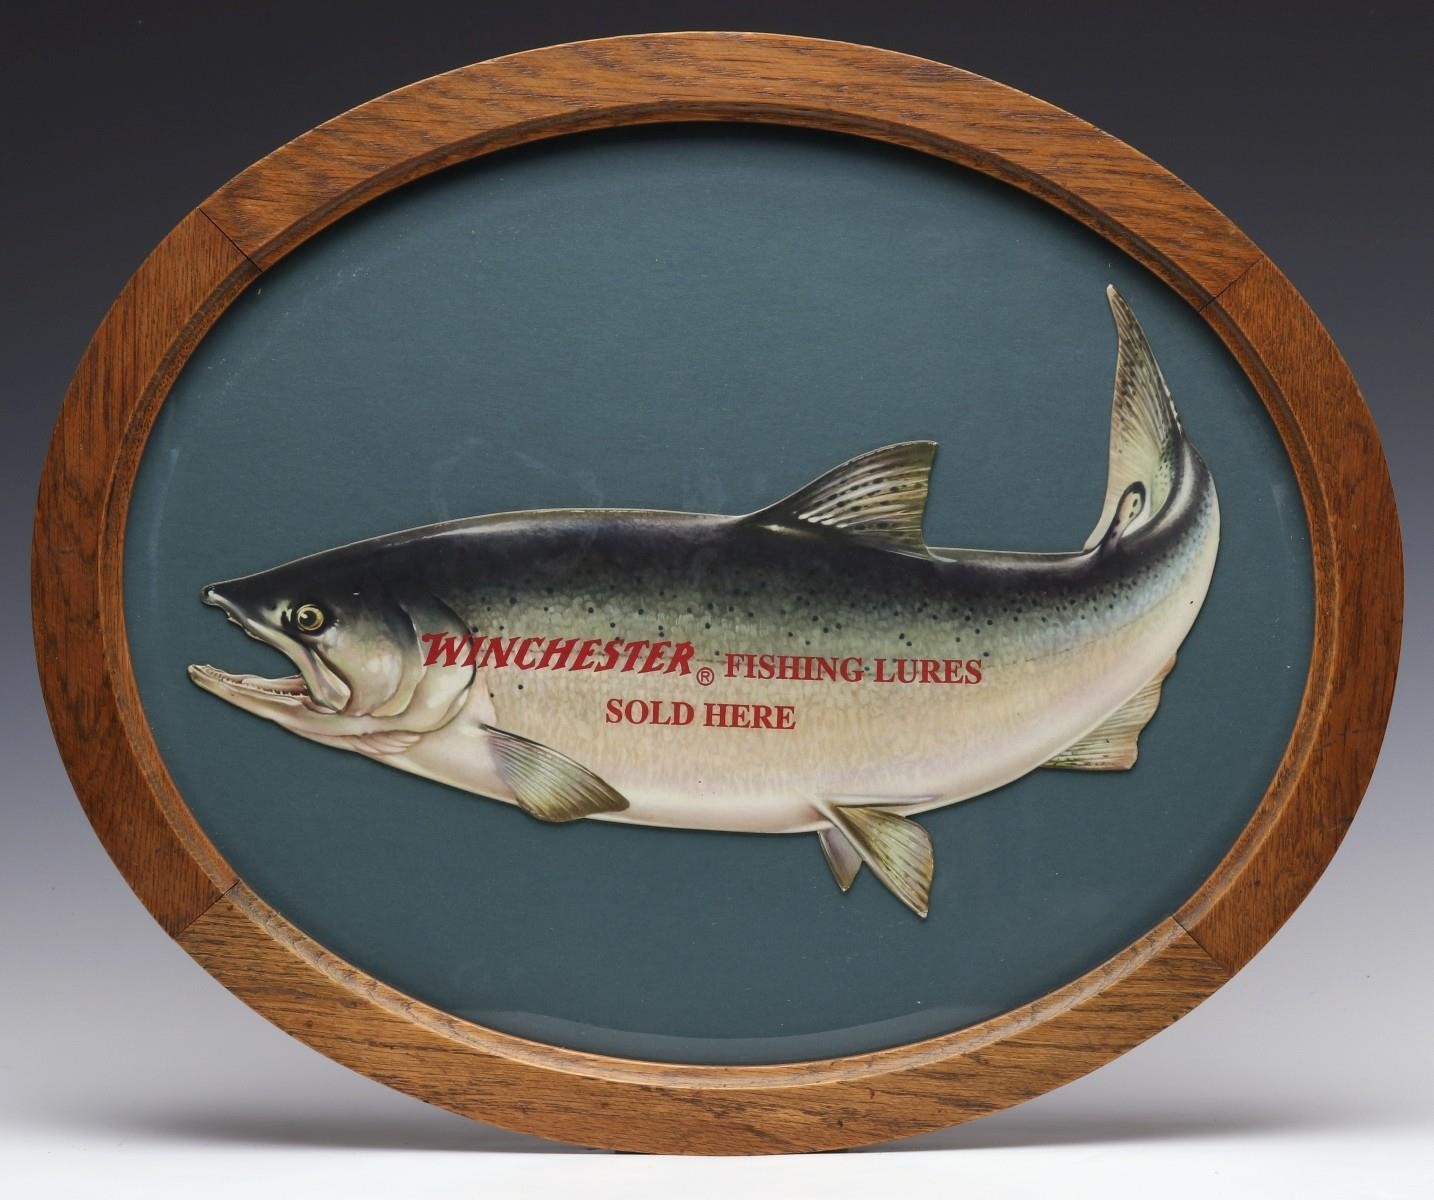 A GOOD WINCHESTER FISHING LURES DIE-CUT ADVERTISIN